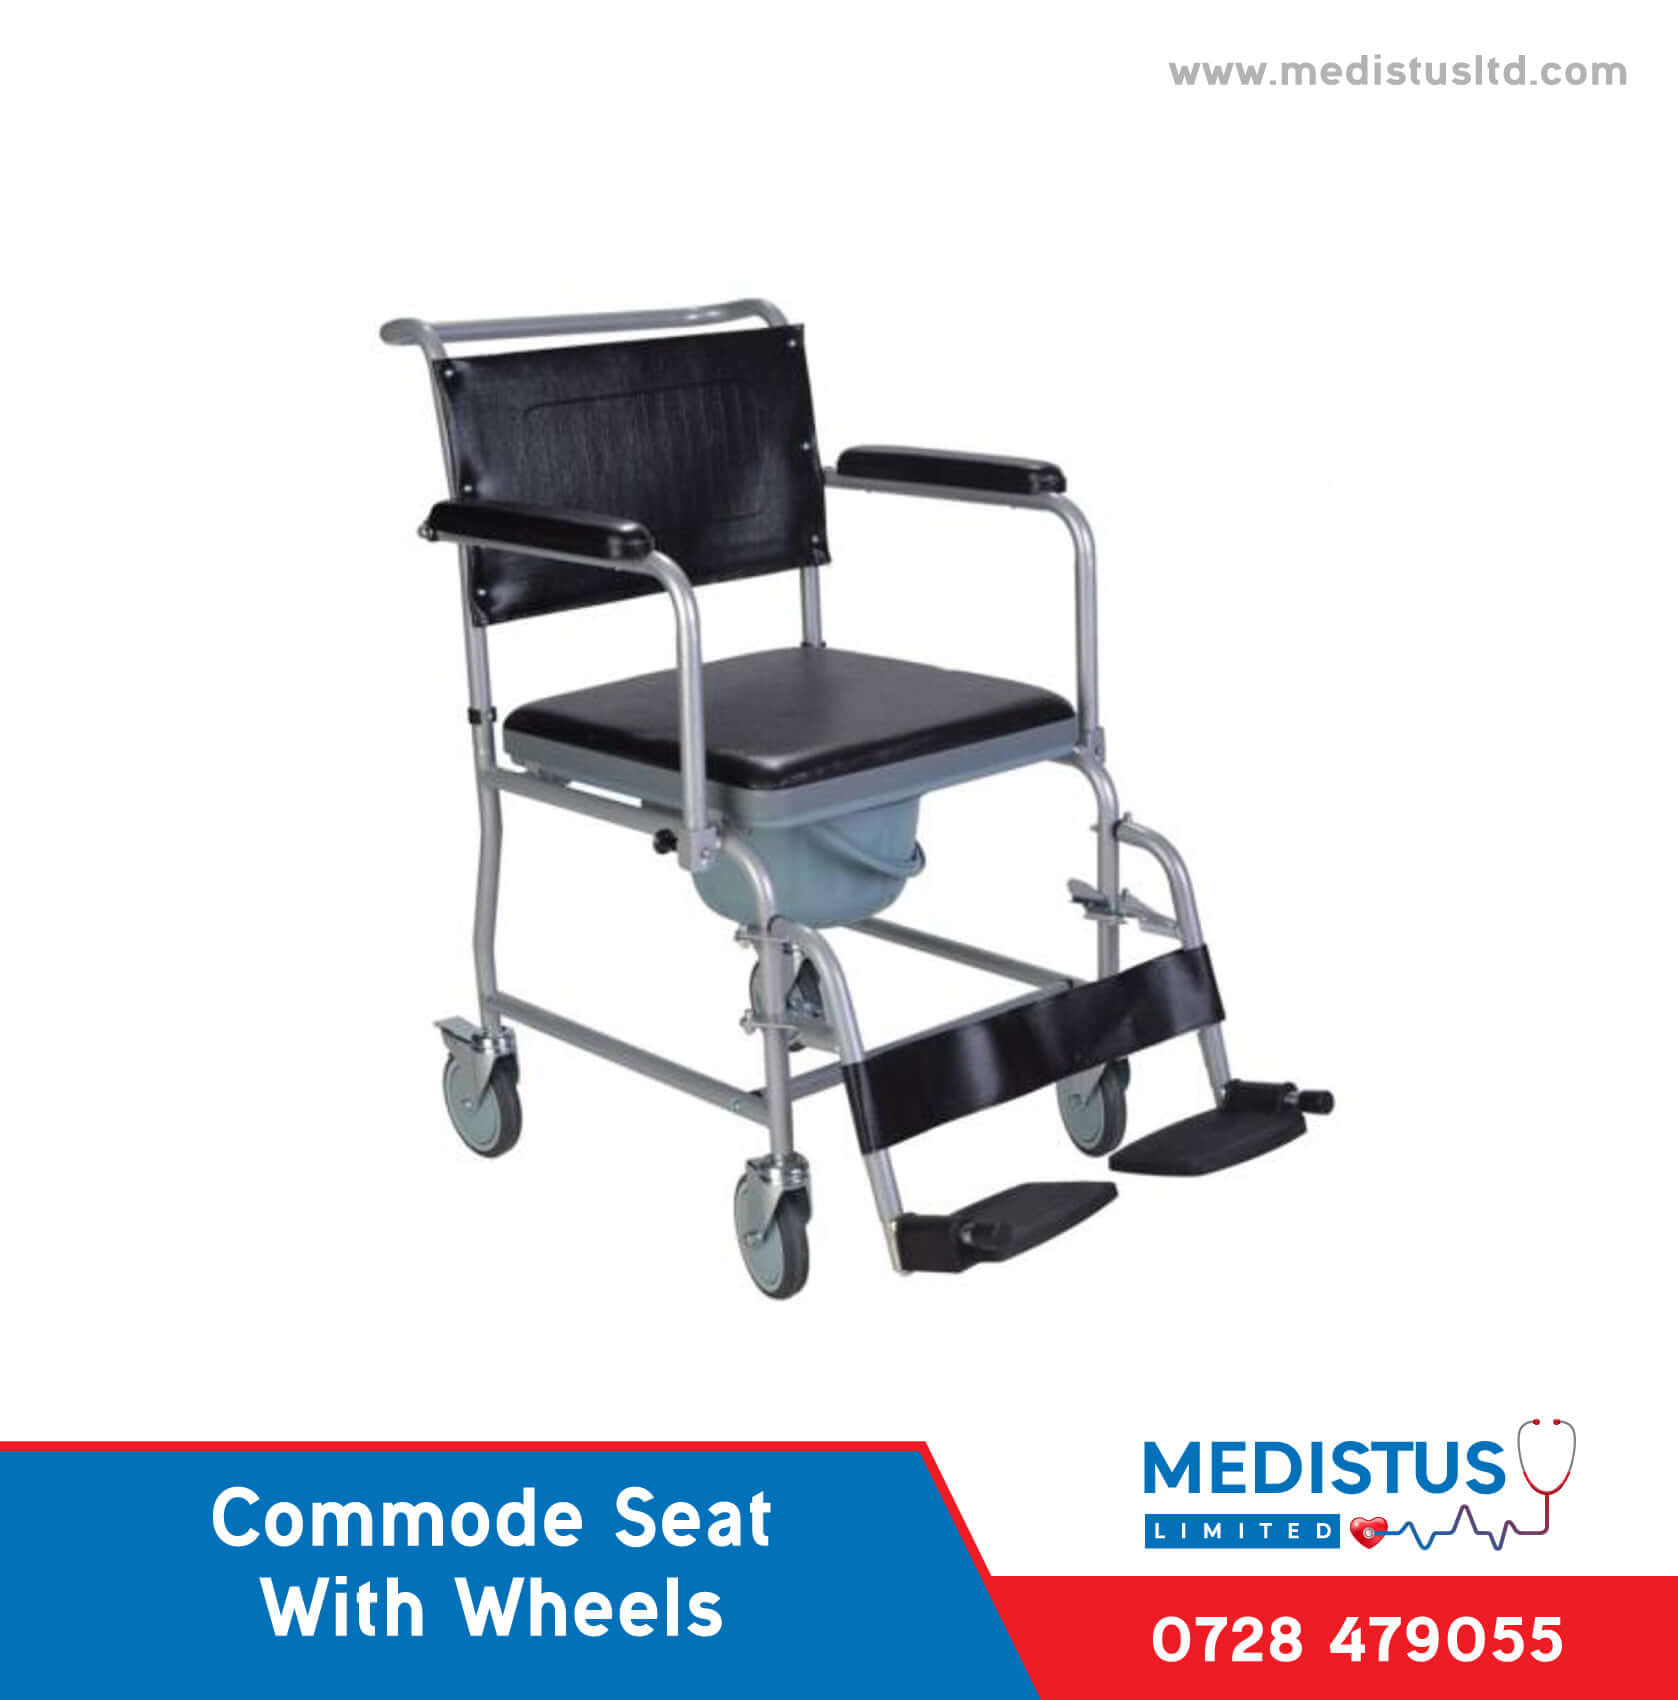 Commode Seat with Wheels in Kenya